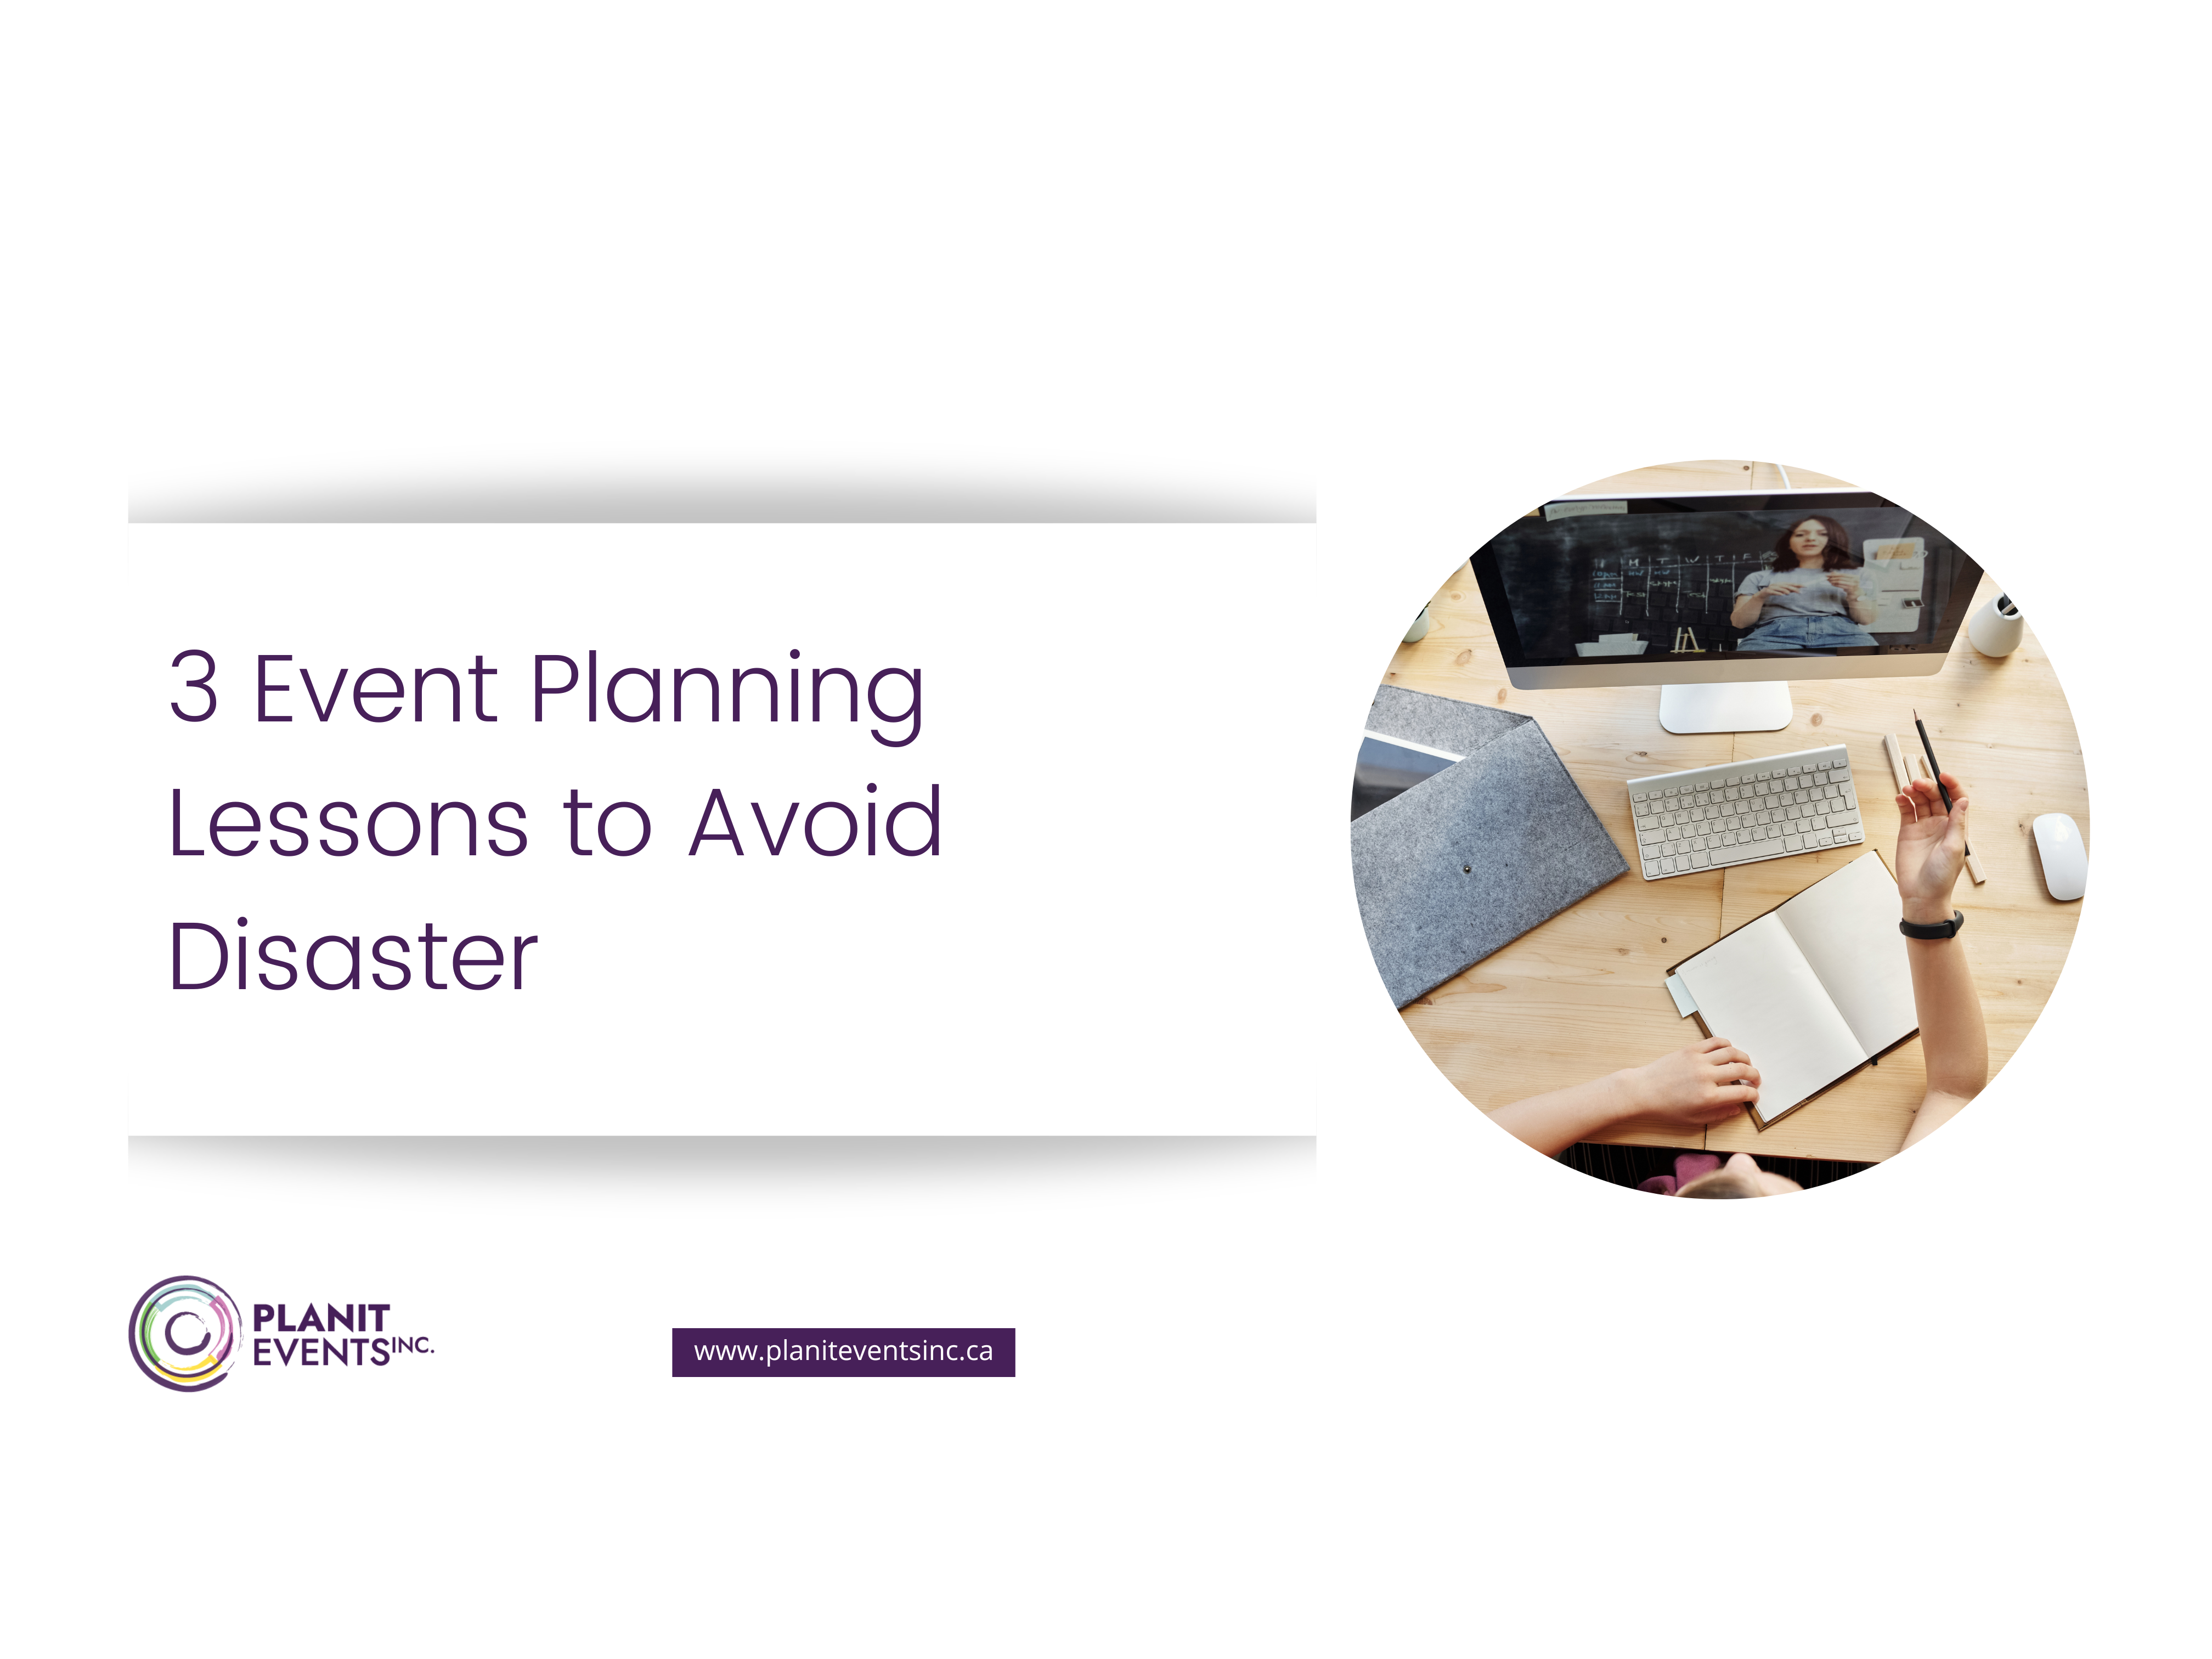 3 Event Planning Lessons to Avoid Disaster